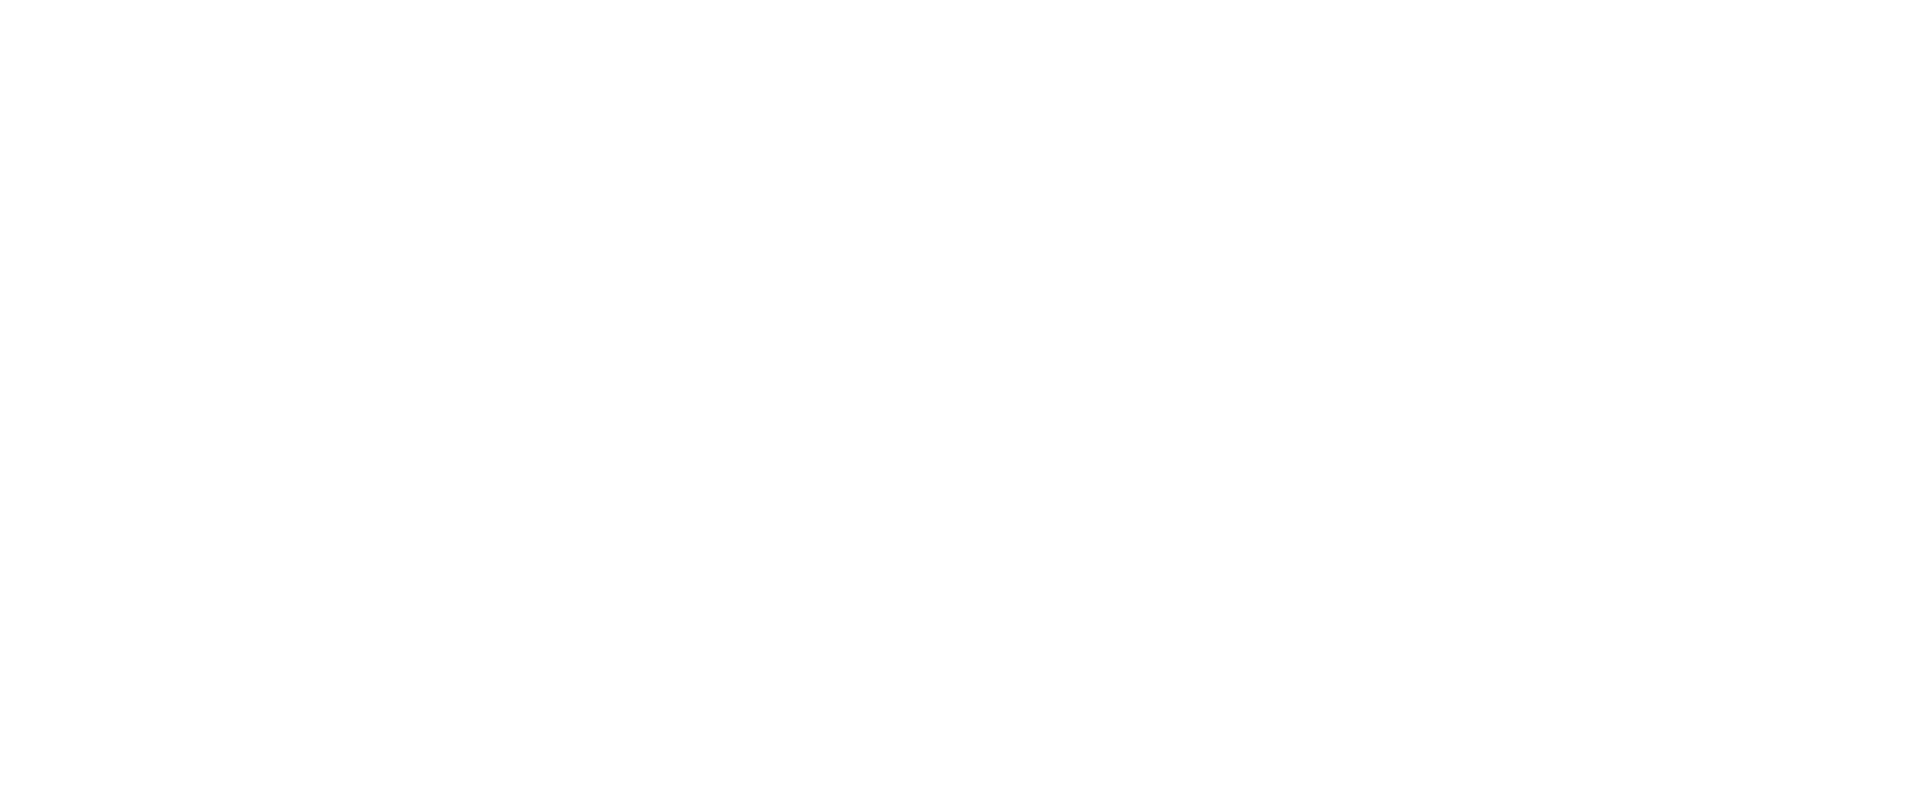 bethany lutheran college choir tour